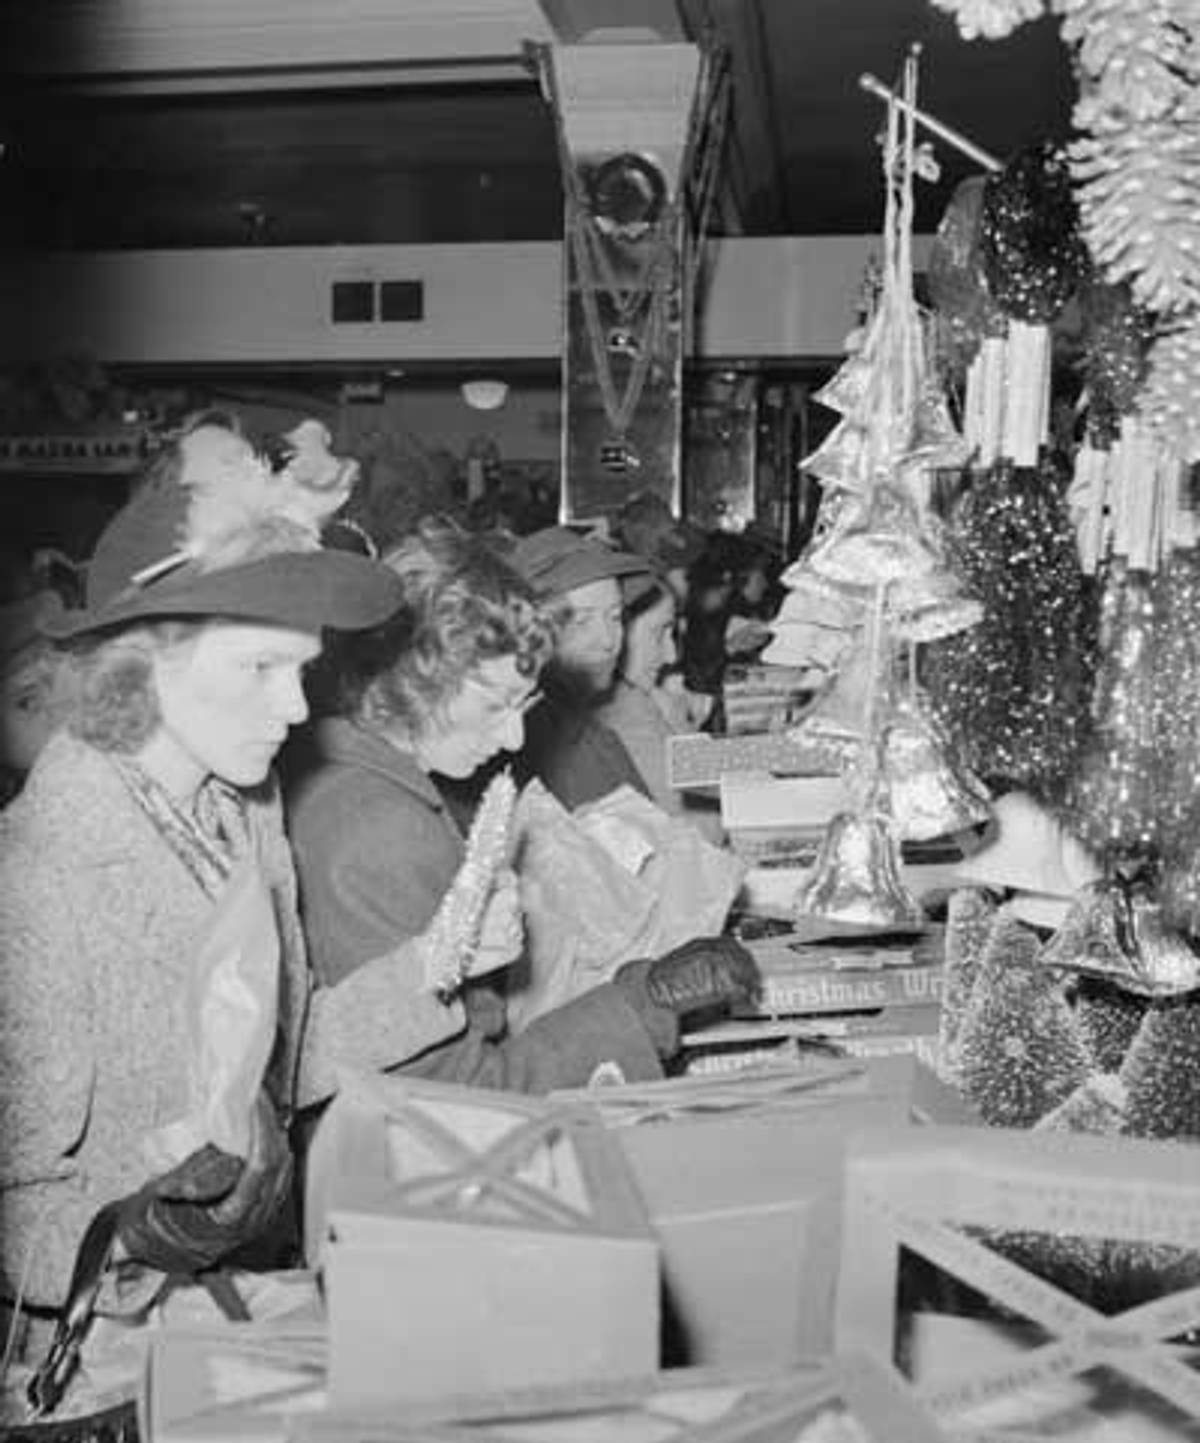 Christmas shopping in Woolworth’s five and ten cent store, Washington, D.C., 1941.(Photo: John Collier/Library of Congress)